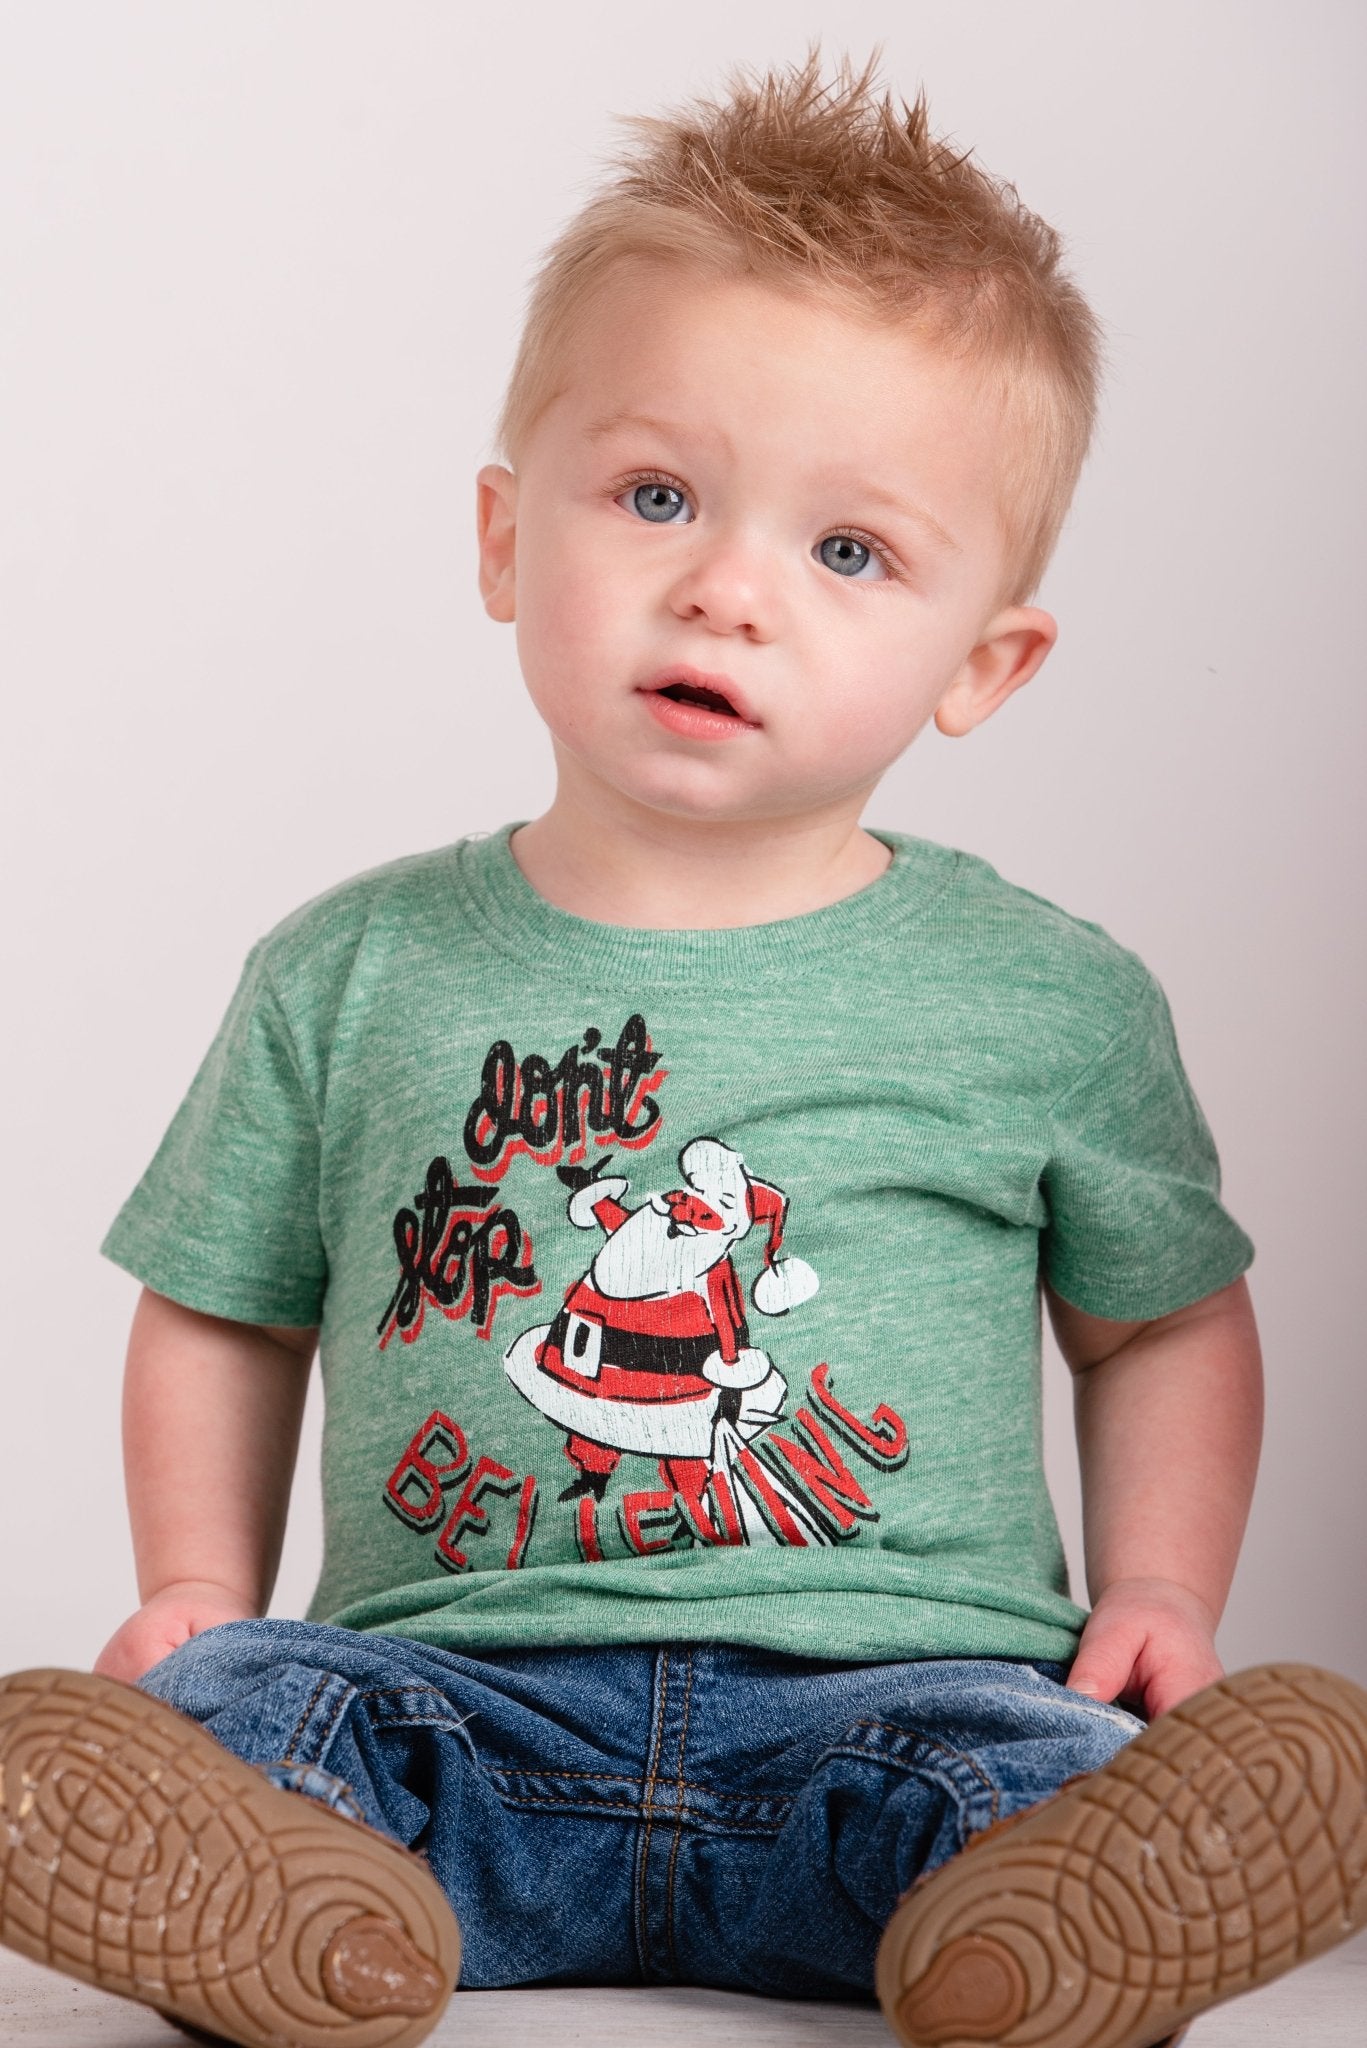 KIDS Don't stop believing t-shirt green - Affordable T-shirts - Boutique Graphic T-Shirts at Lush Fashion Lounge Boutique in Oklahoma City